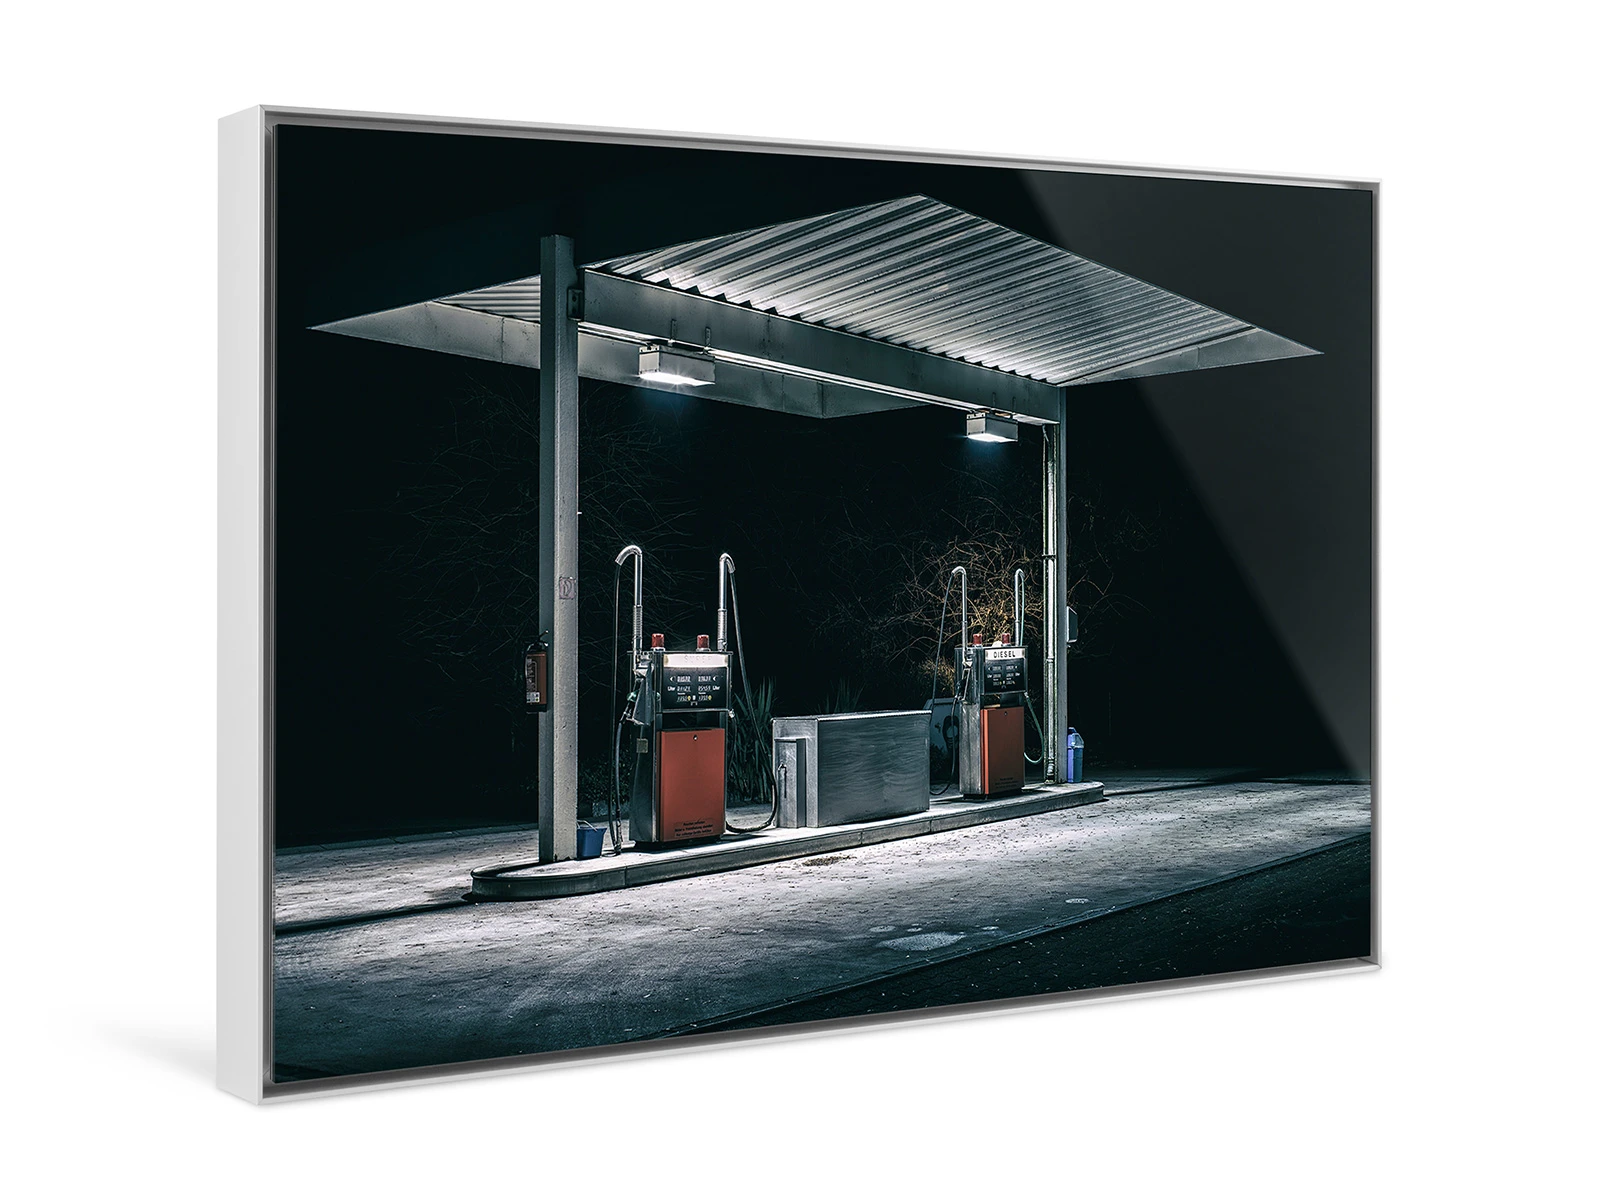 A night shot of a gas station in an Aluminium ArtBox.